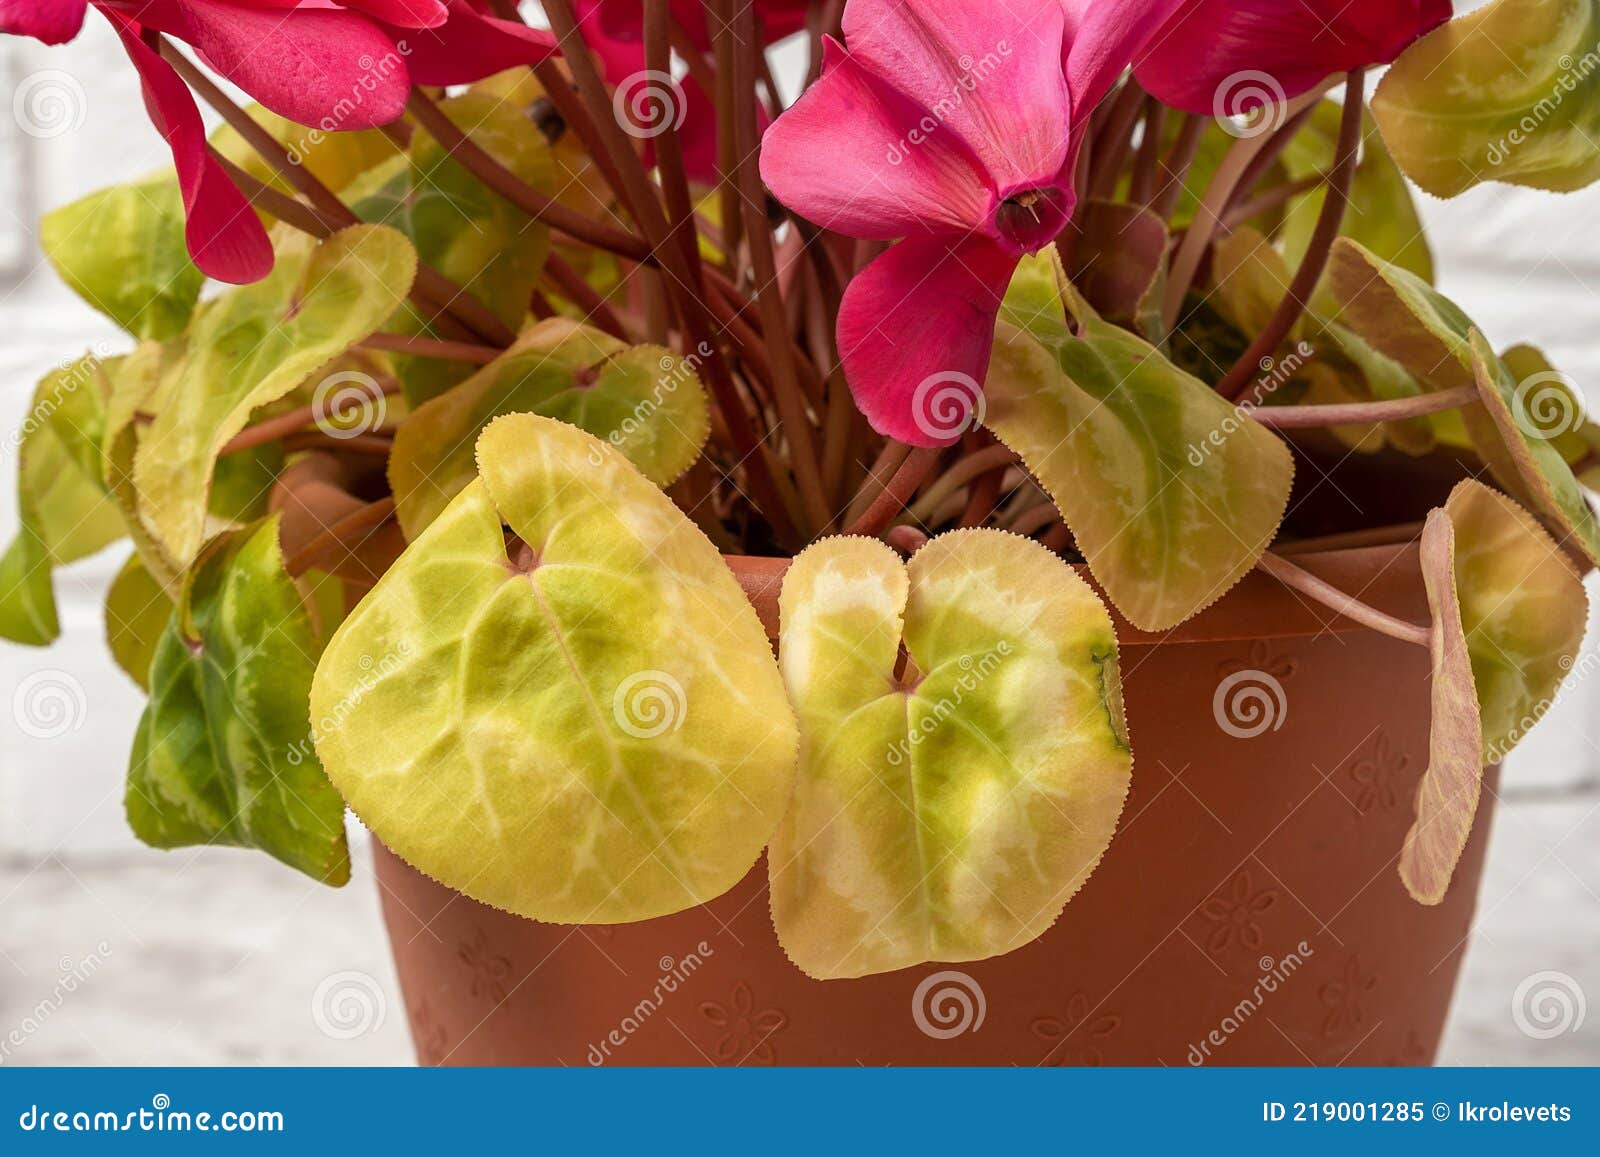 yellow leaves on a cyclamen plant, closeup. mistake people make with indoor plant care and growing houseplants